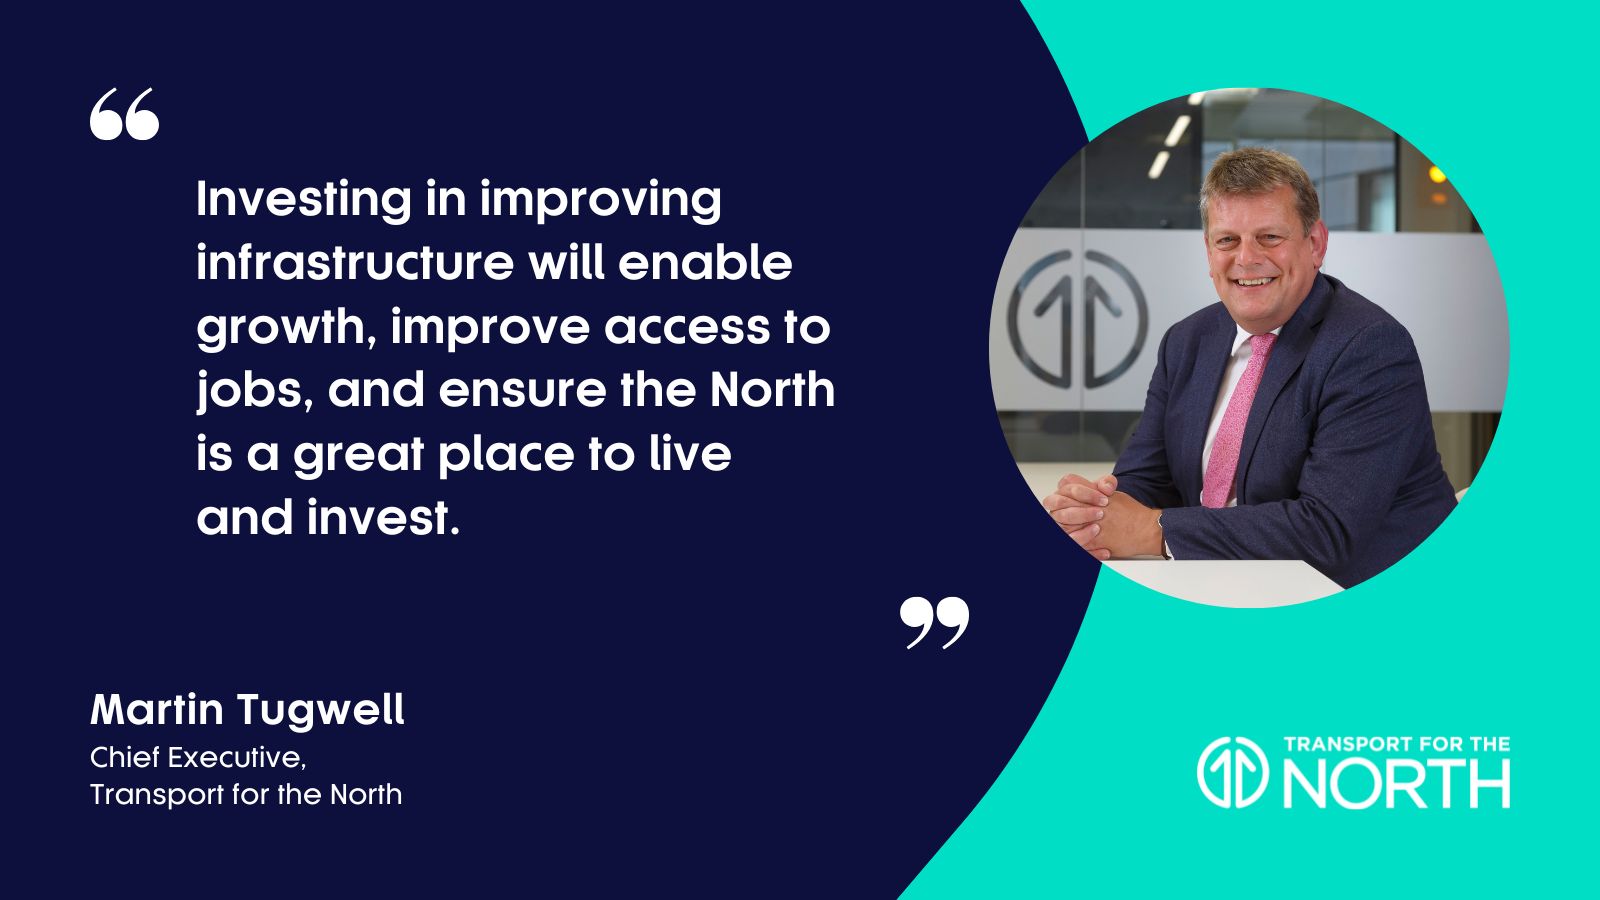 Martin Tugwell talks about the benefits of investing in improved infrastructure